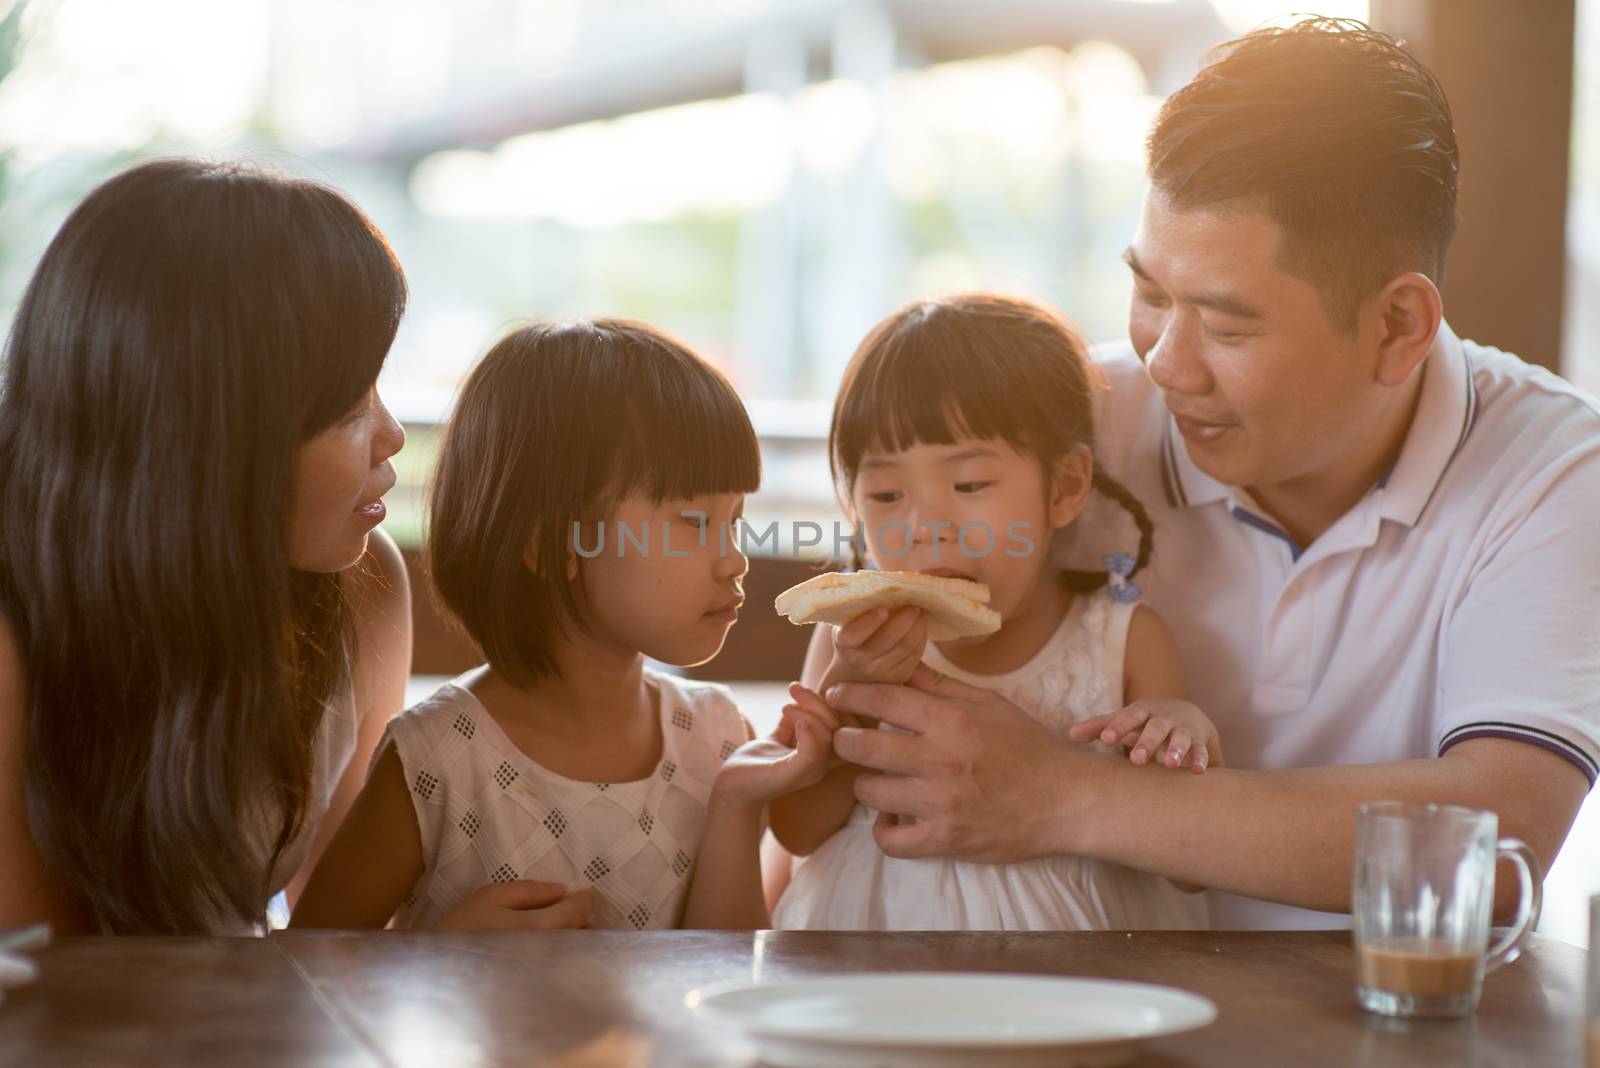 Cute children eating and sharing butter toast at cafe. Asian family outdoor lifestyle with natural light.